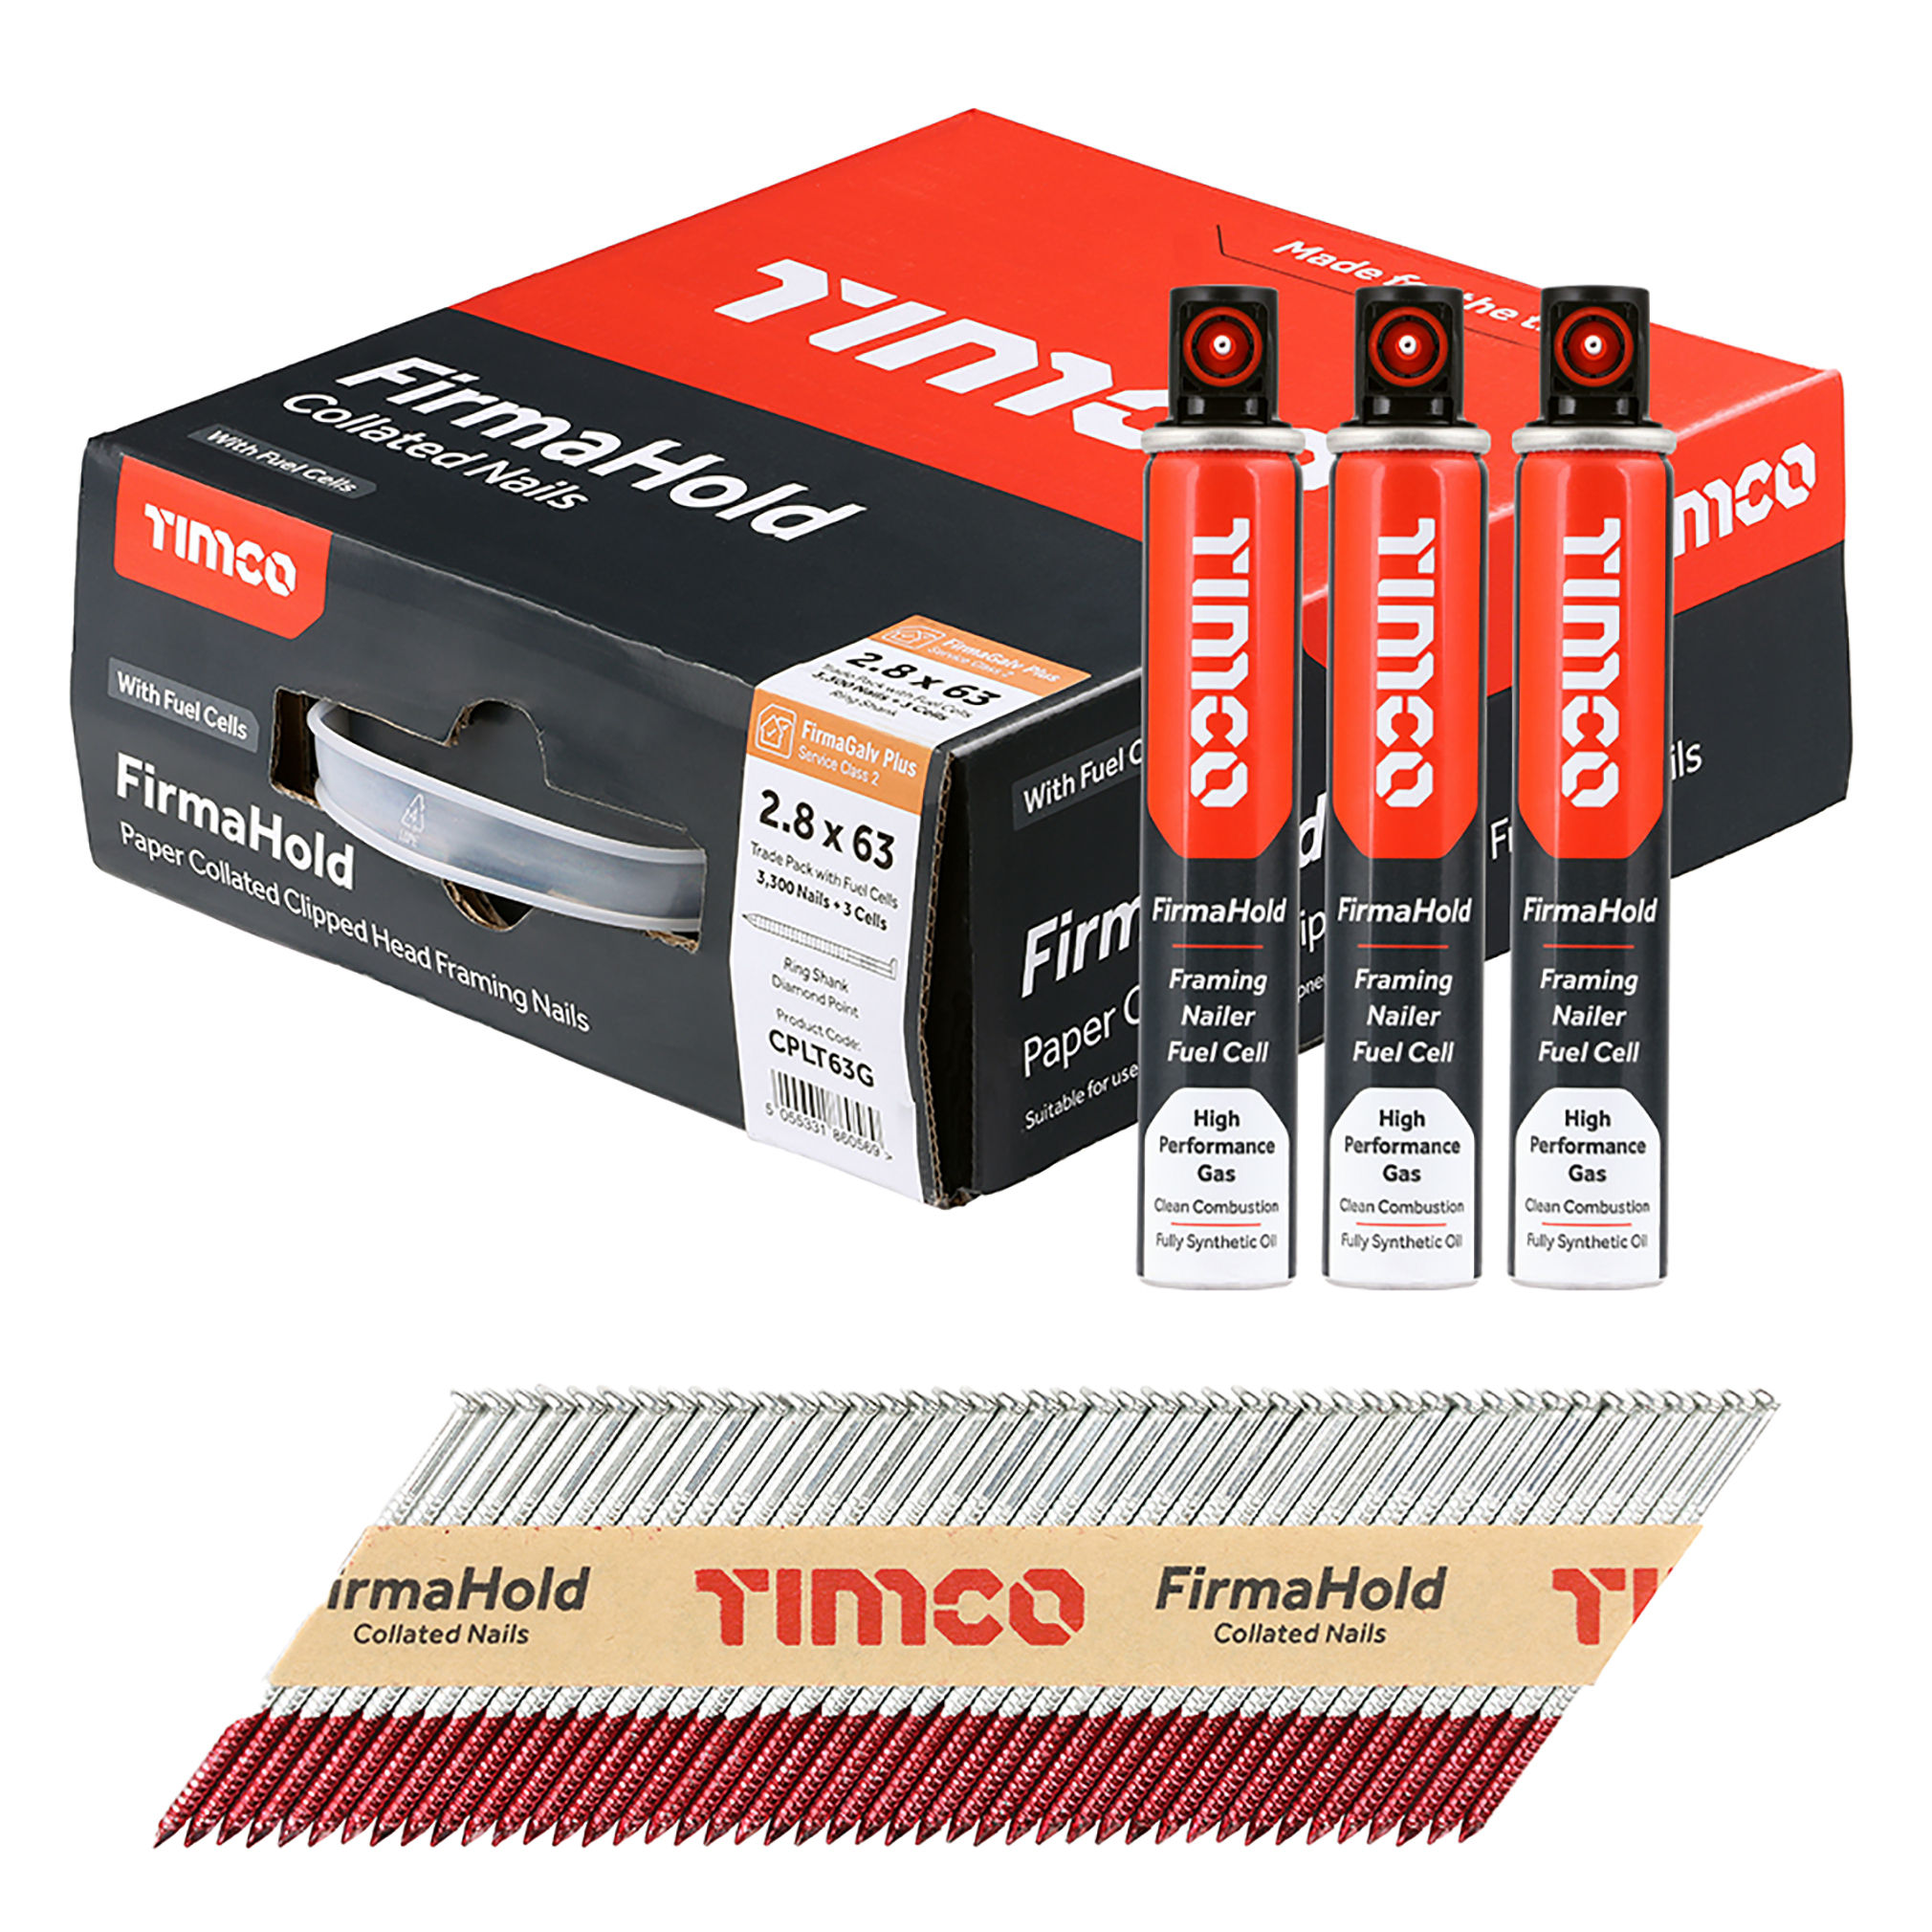 Timco FirmaHold Collated Clipped Head Ring Shank Nails and 3 Fuel Cells (Box of 3300) 2.8mm x 63mm - CPLT63G